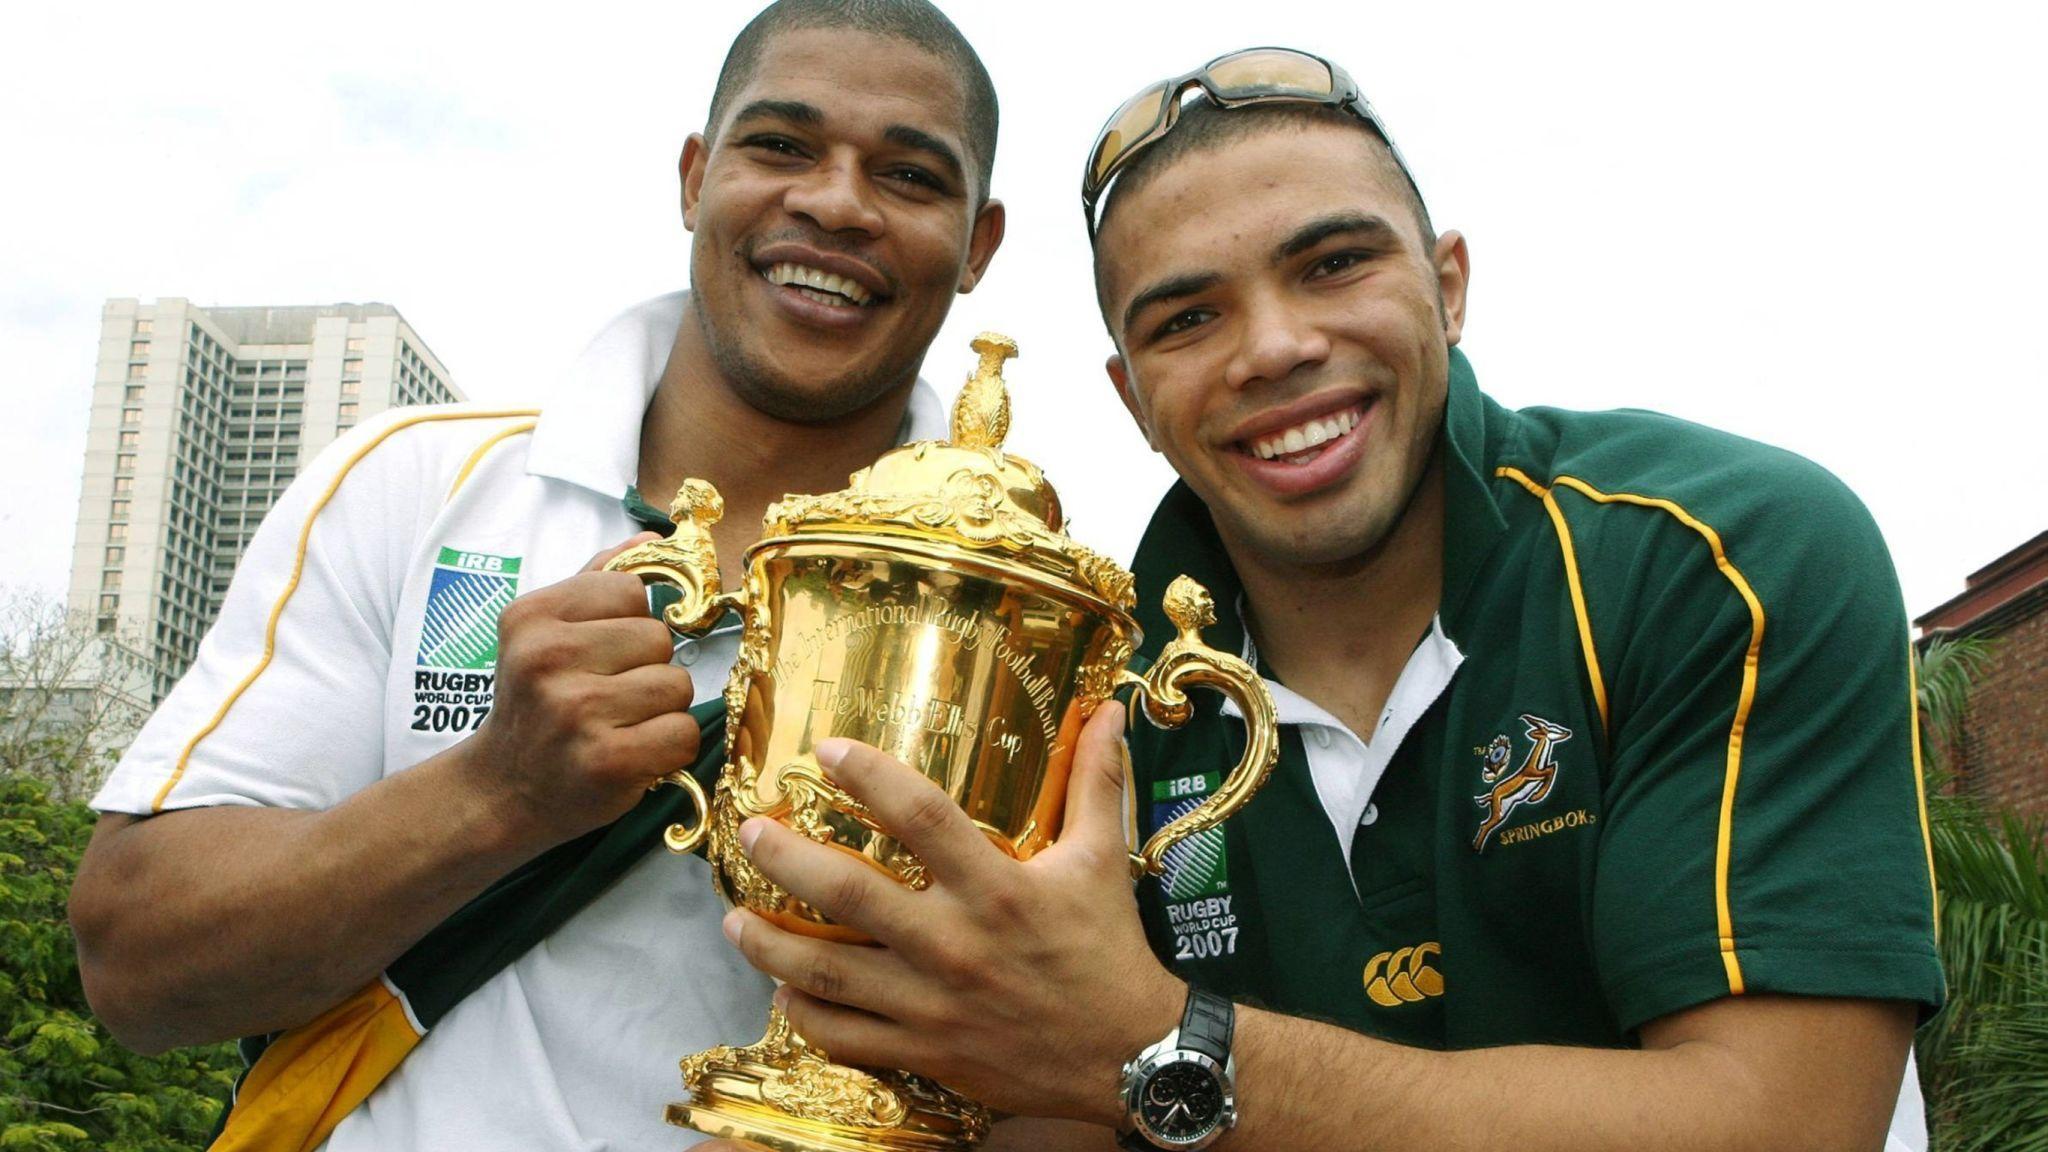 Former Springbok Bryan Habana: This is the tightest World Cup we